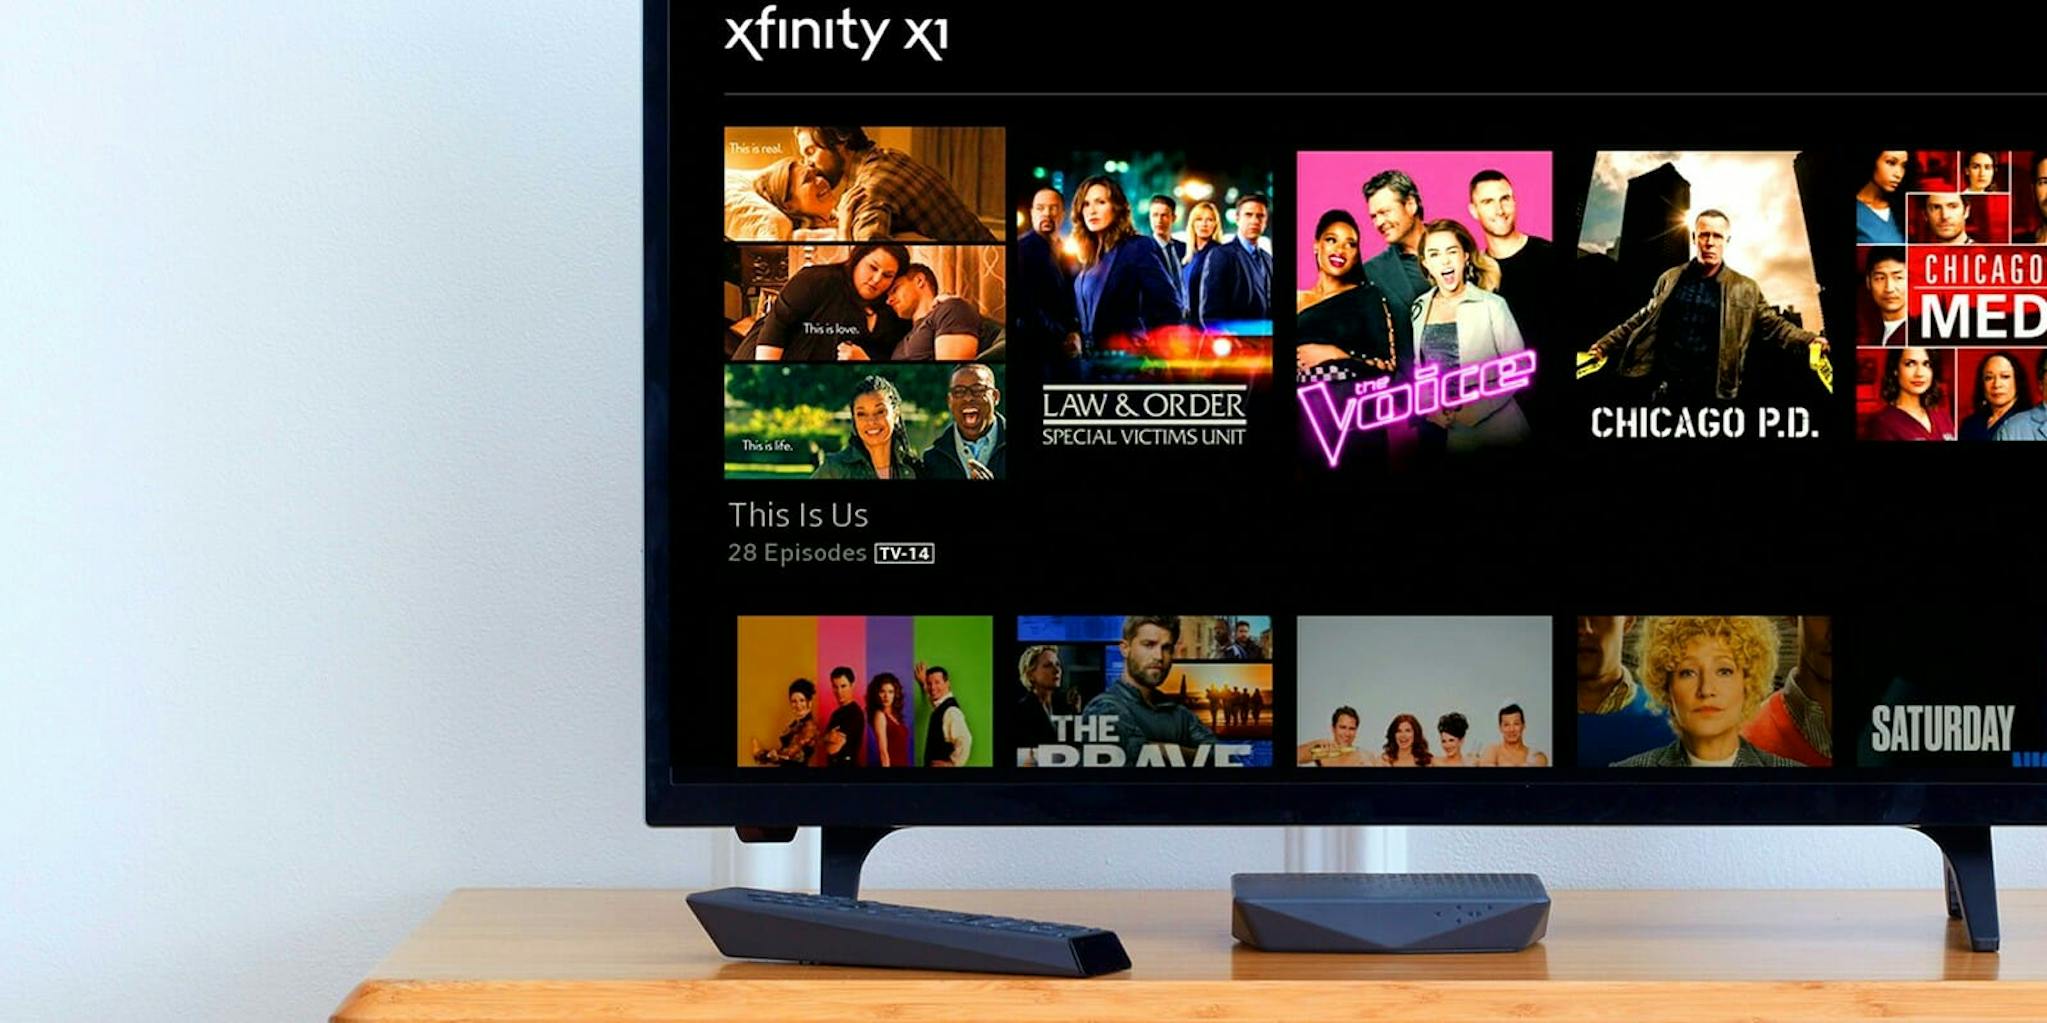 How Comcast's Xfinity X1 Works Cost, Apps, DVR & Is It Worth It